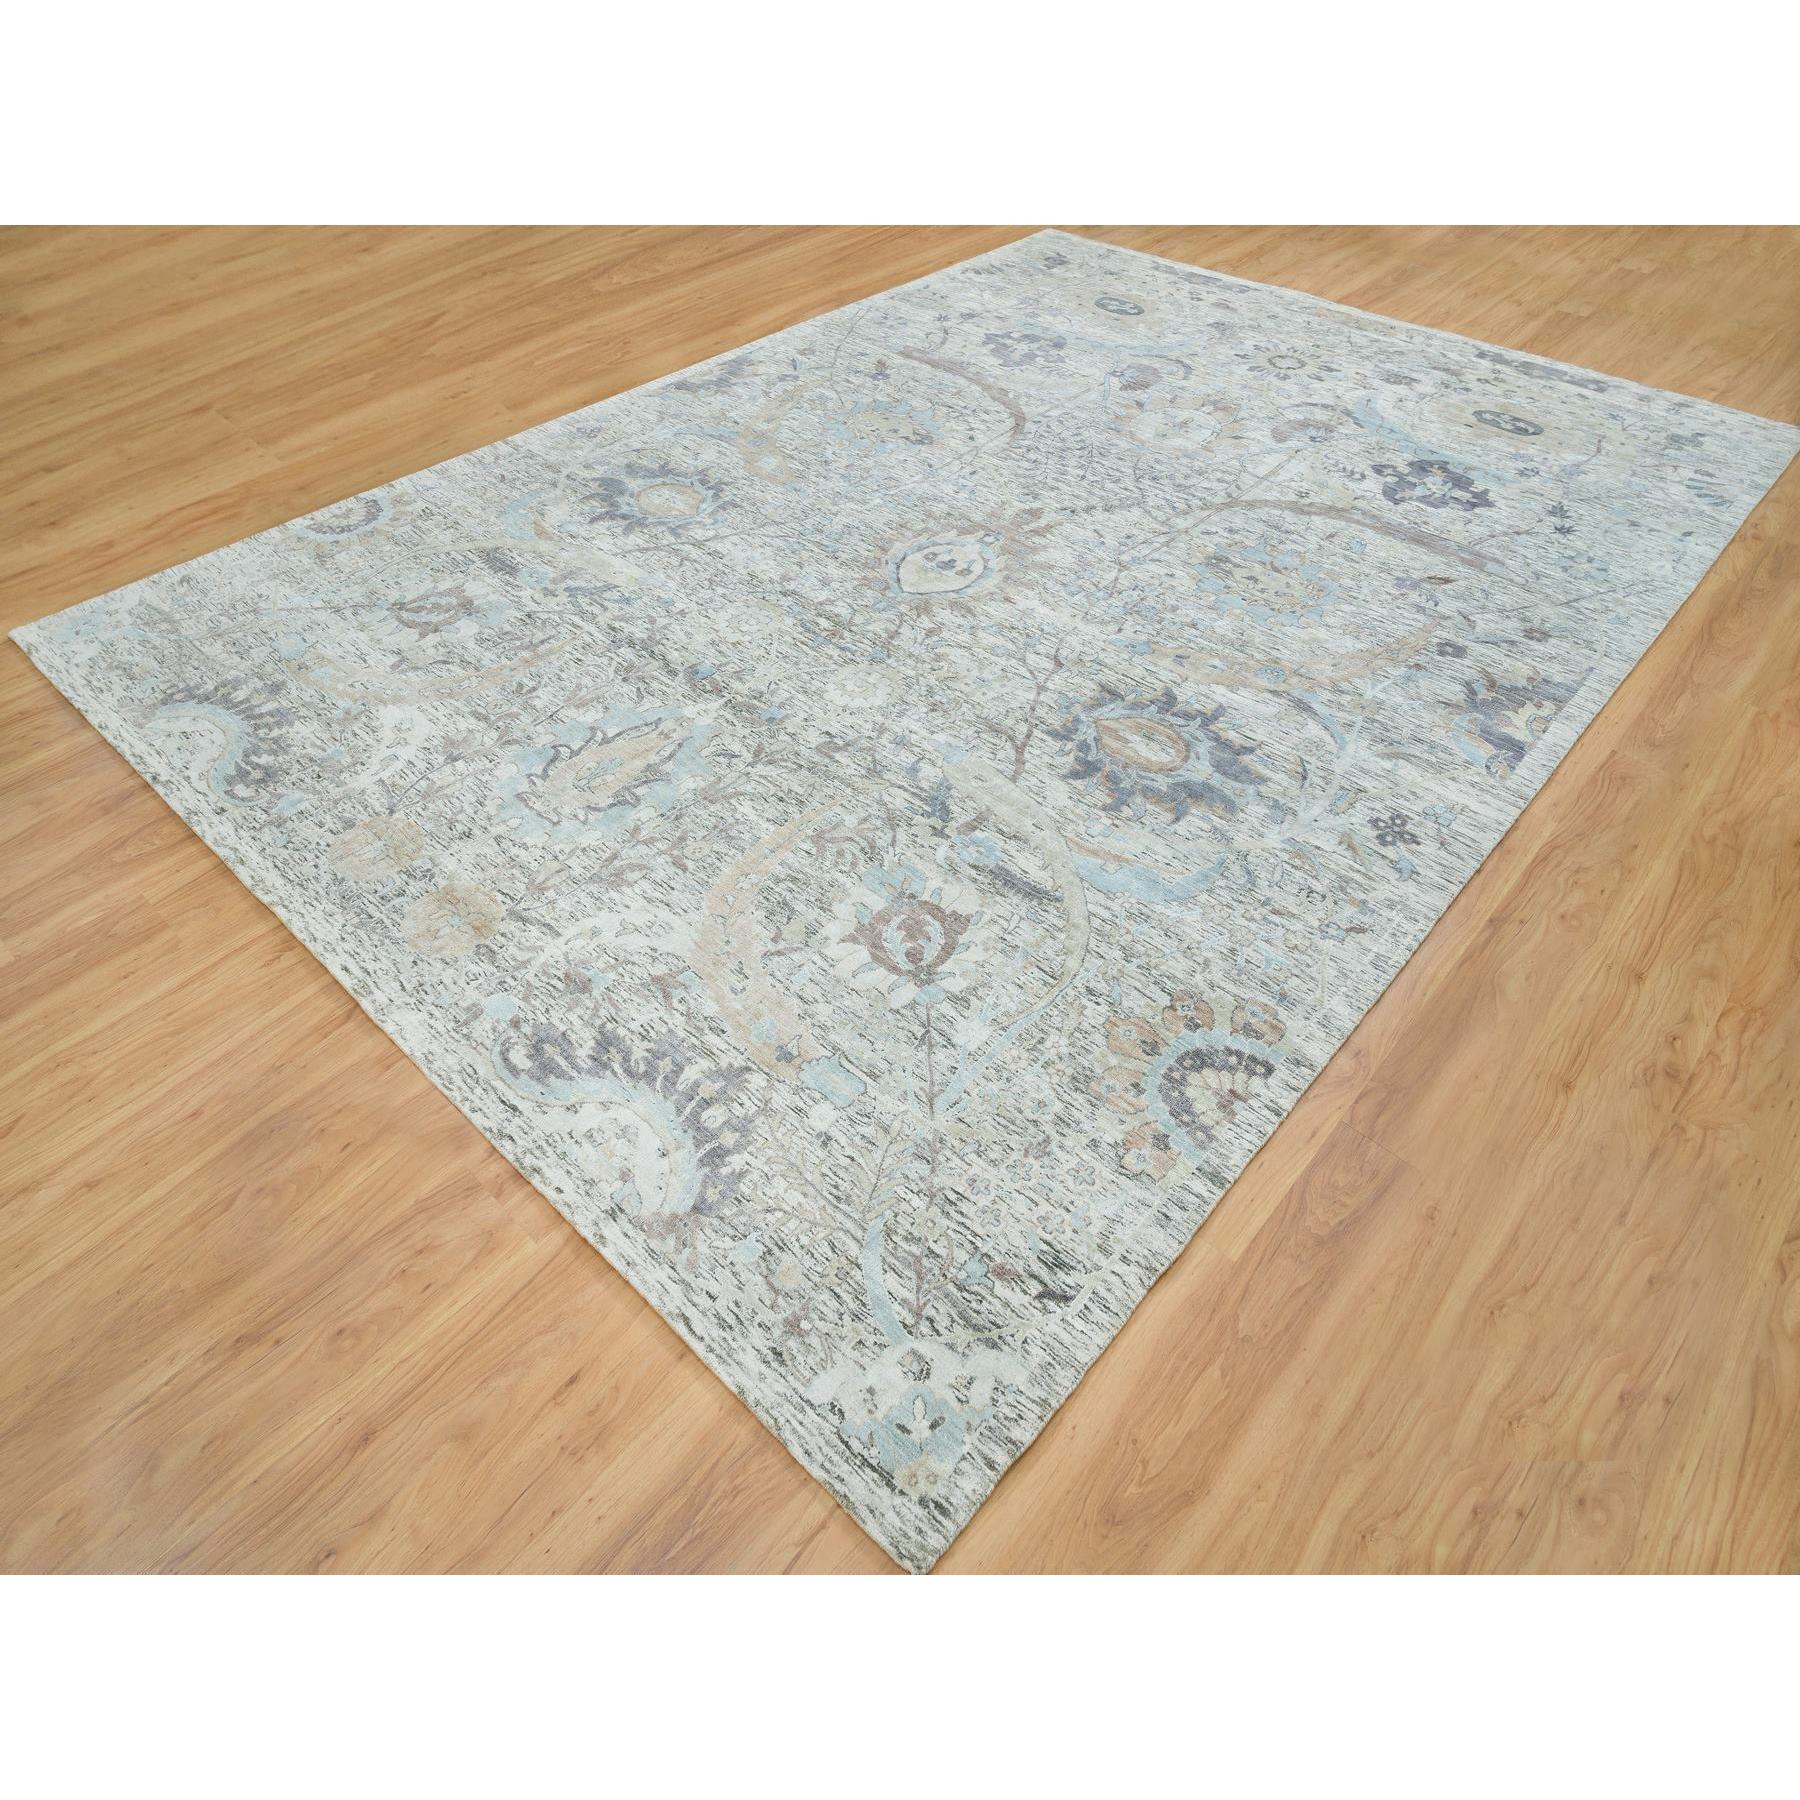  Silk Hand-Knotted Area Rug 10'0